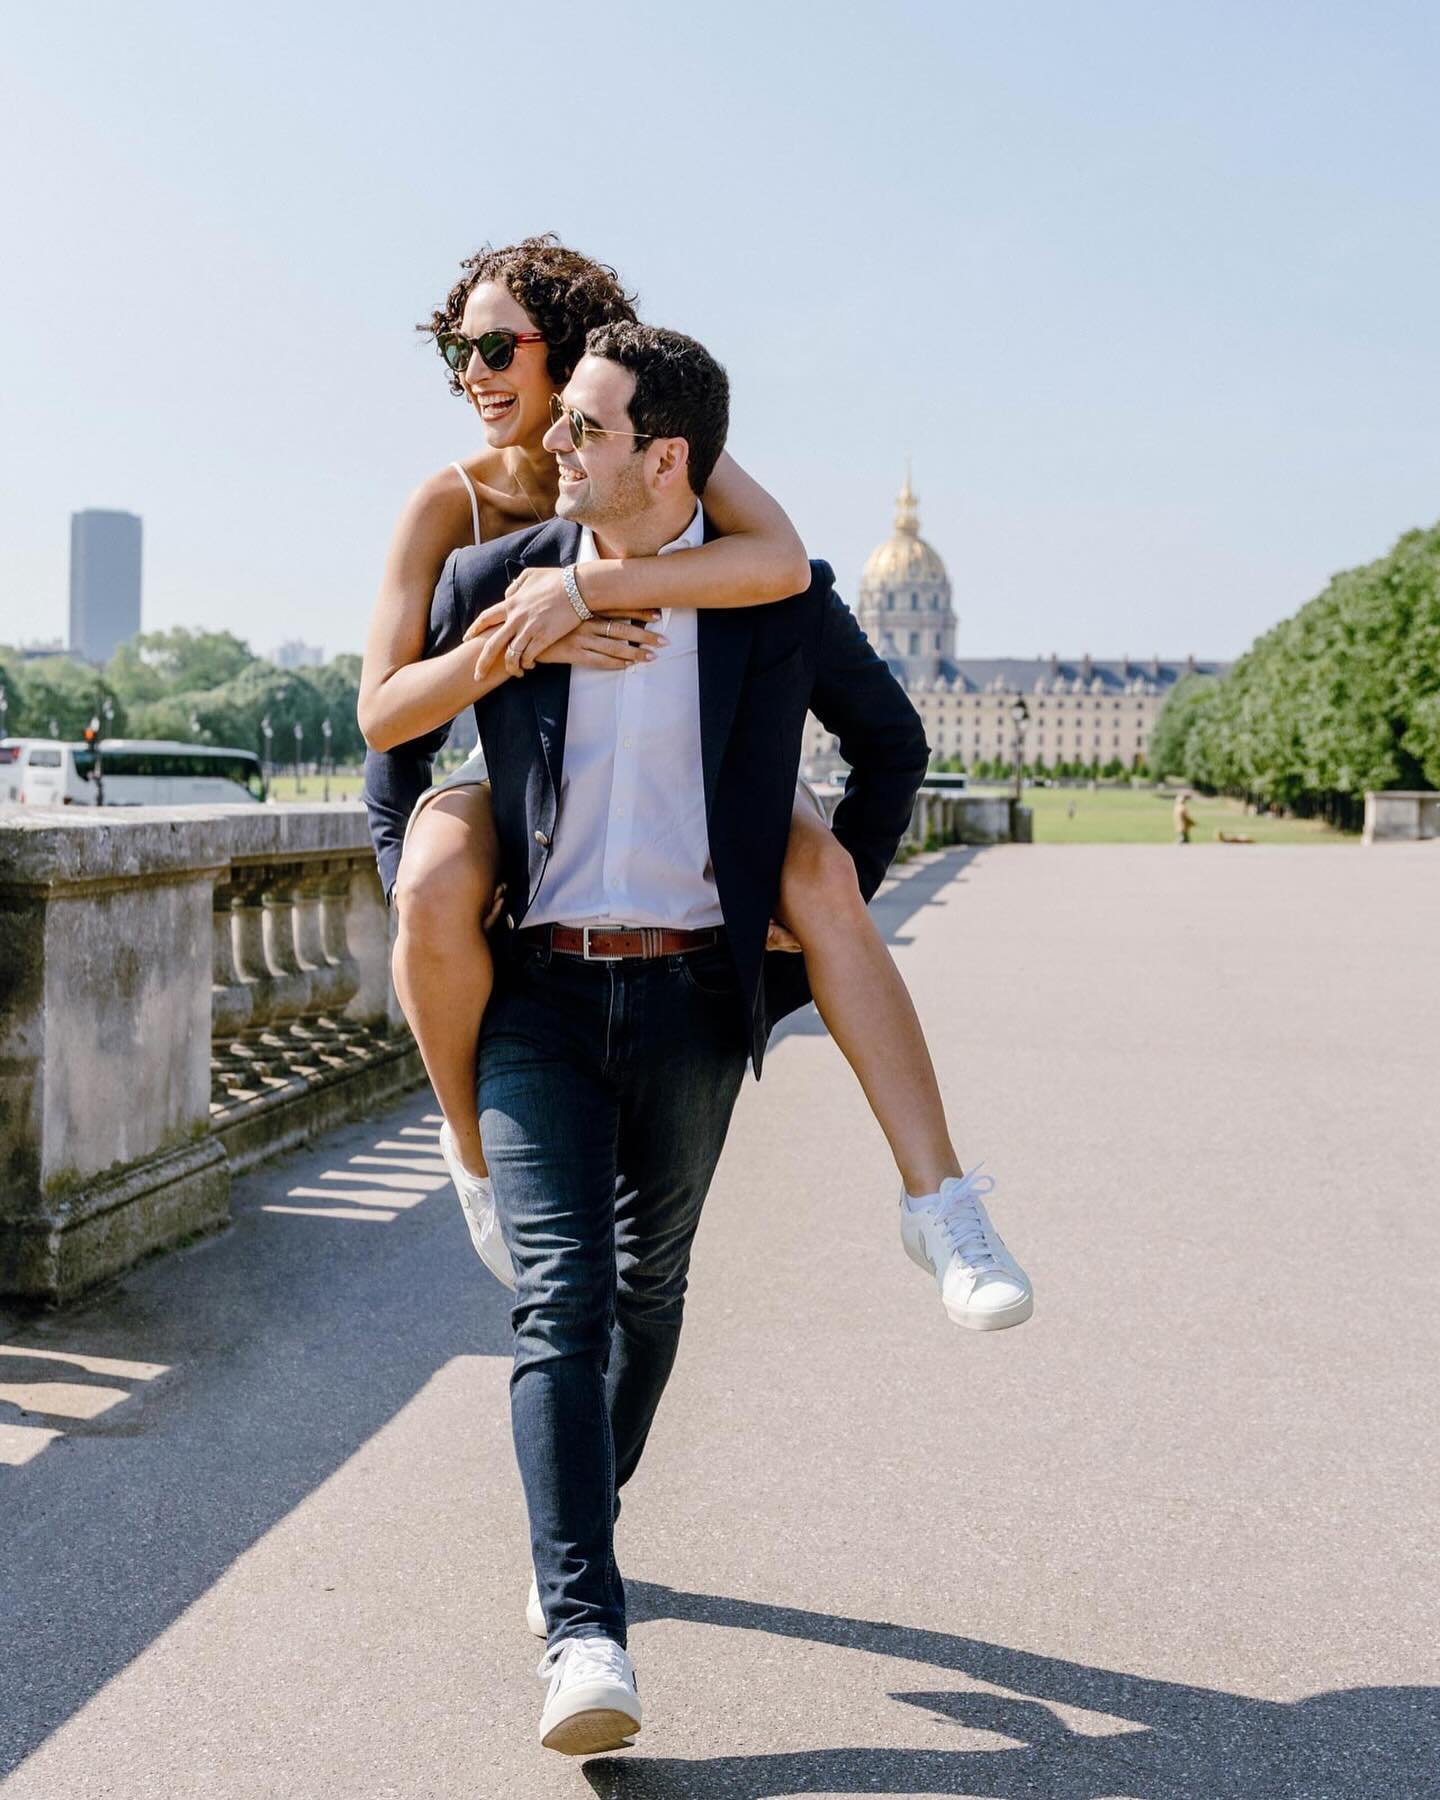 I will never get tired of proposing this location combination : a tasteful view of the Eiffel Tower, avoiding the basic views (and headaches) of Trocadero and immediate area, some Louvre in the background and next to Grand Palais. This shoot is up on